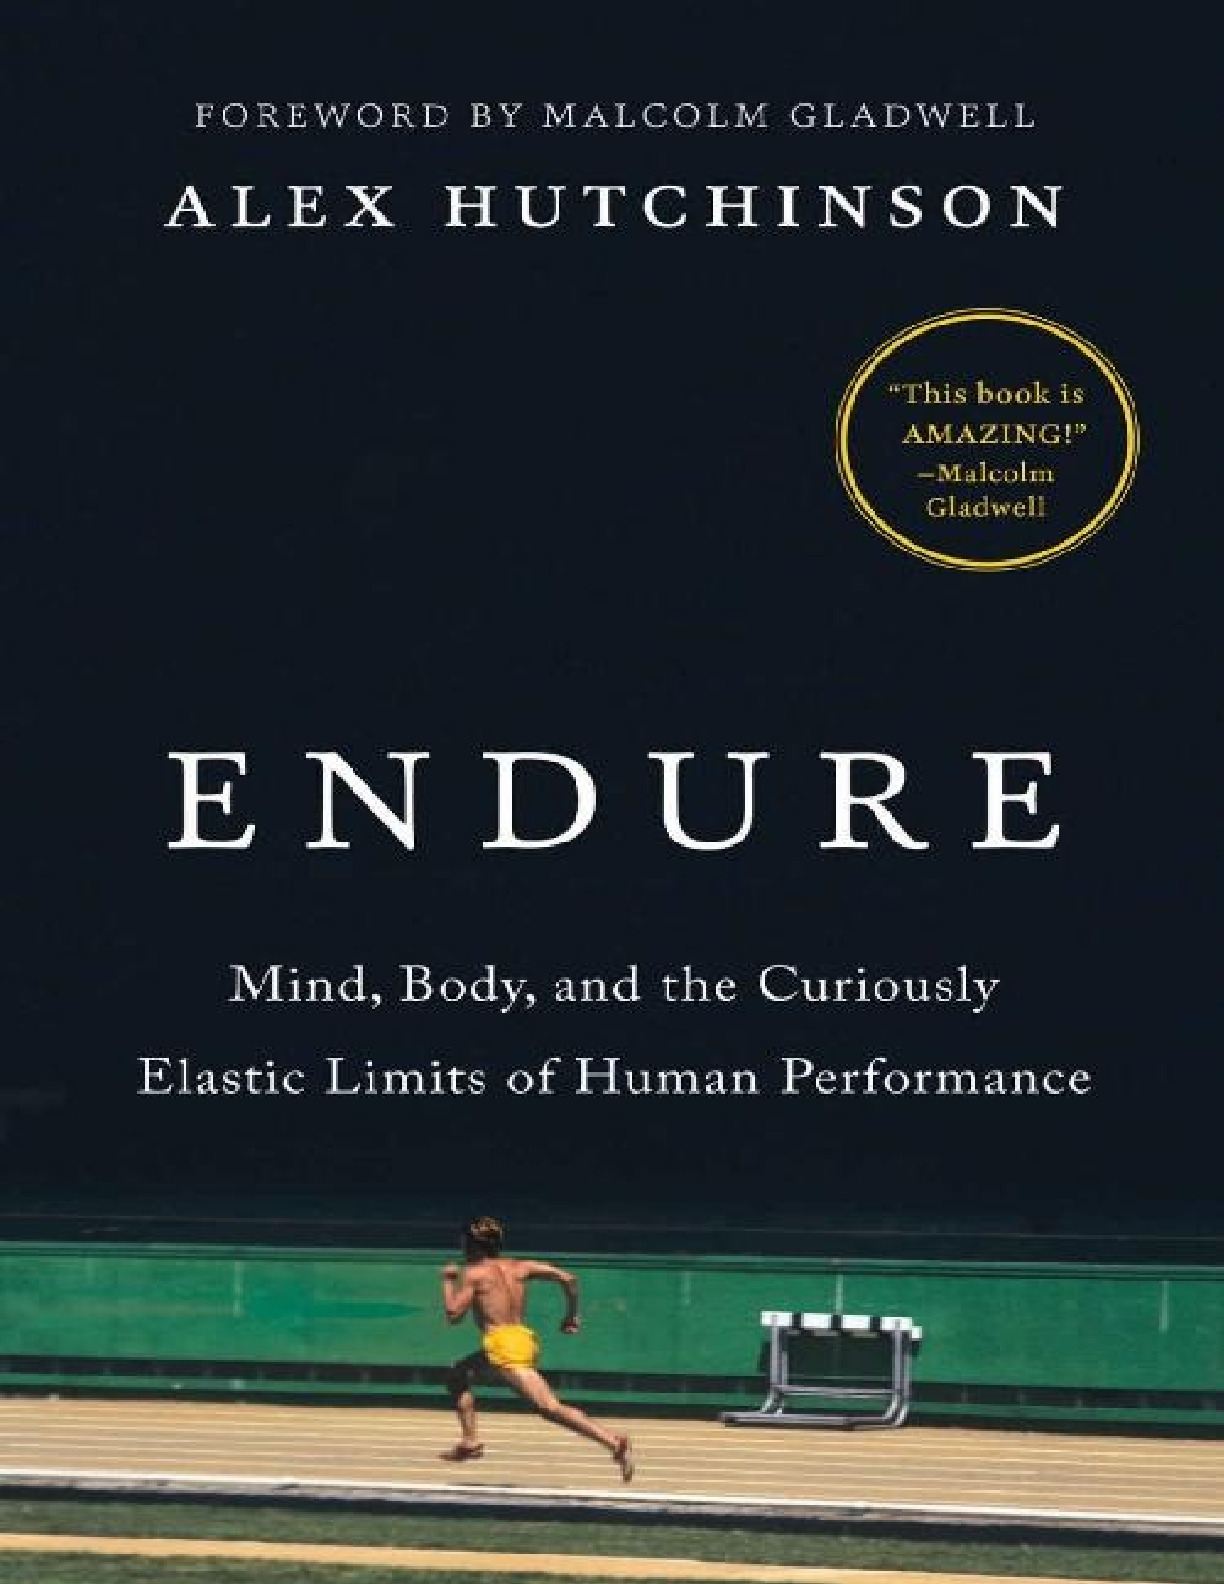 Mind, Body, and the Curiously Elastic Limits of Human Performance